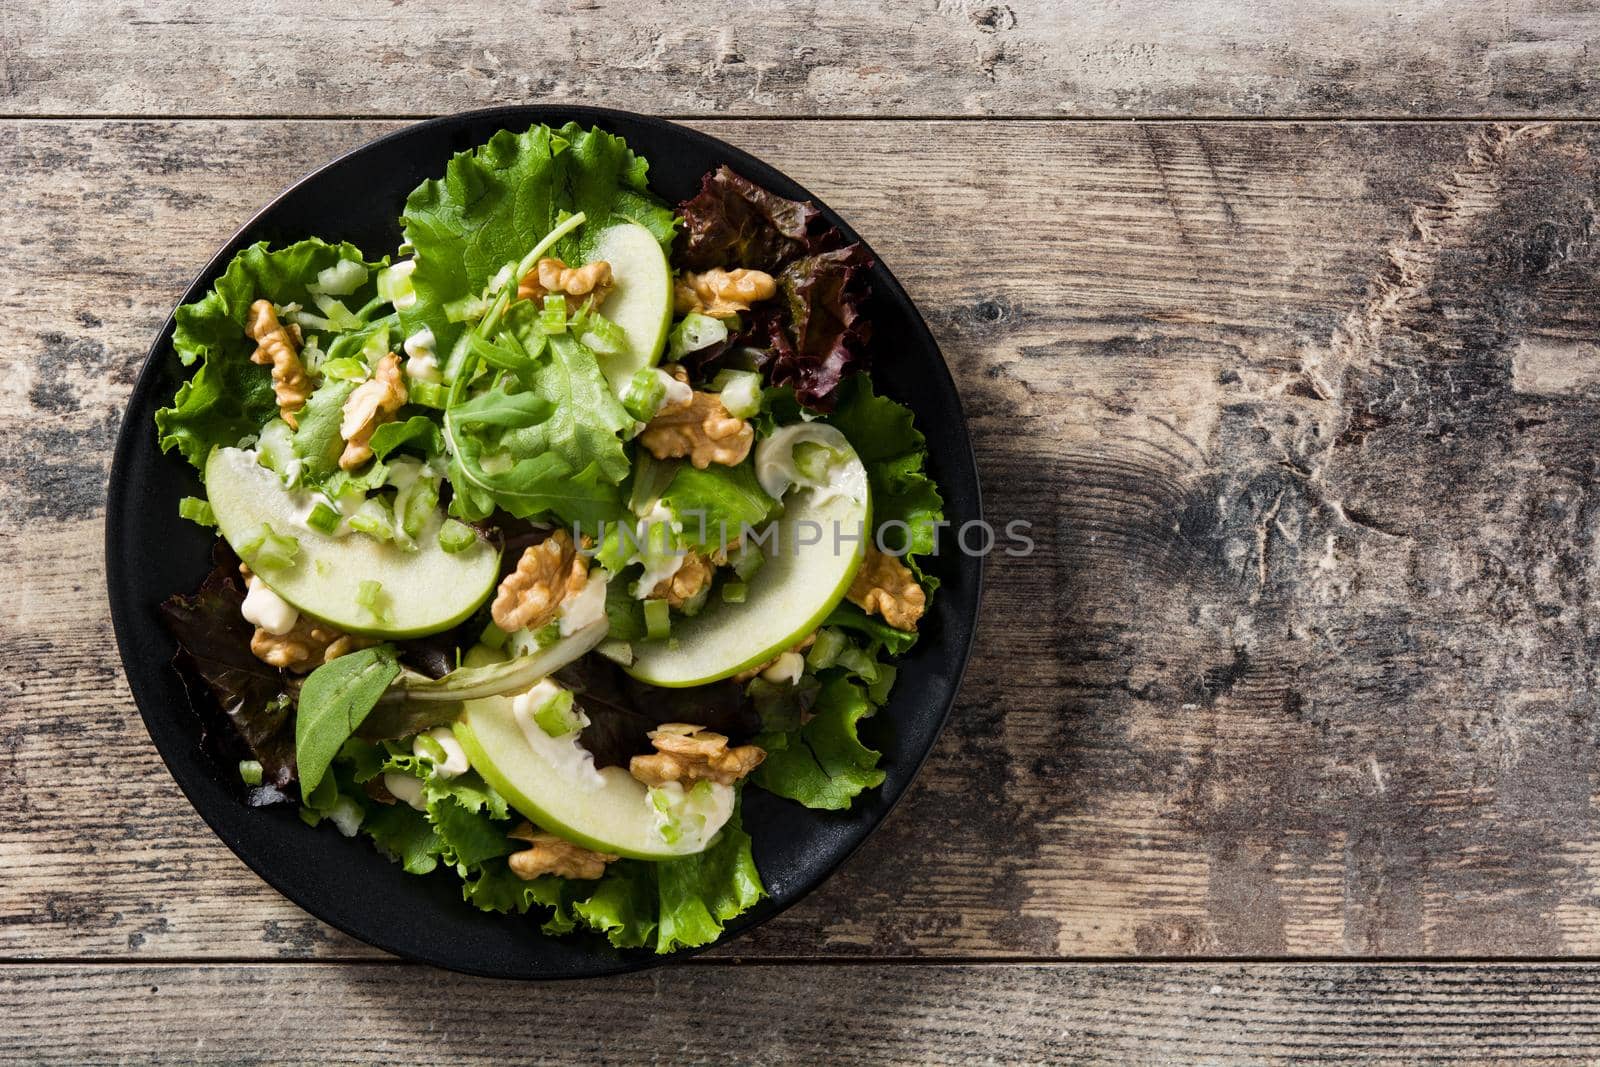 Fresh Waldorf salad with lettuce, green apples, walnuts and cele by chandlervid85